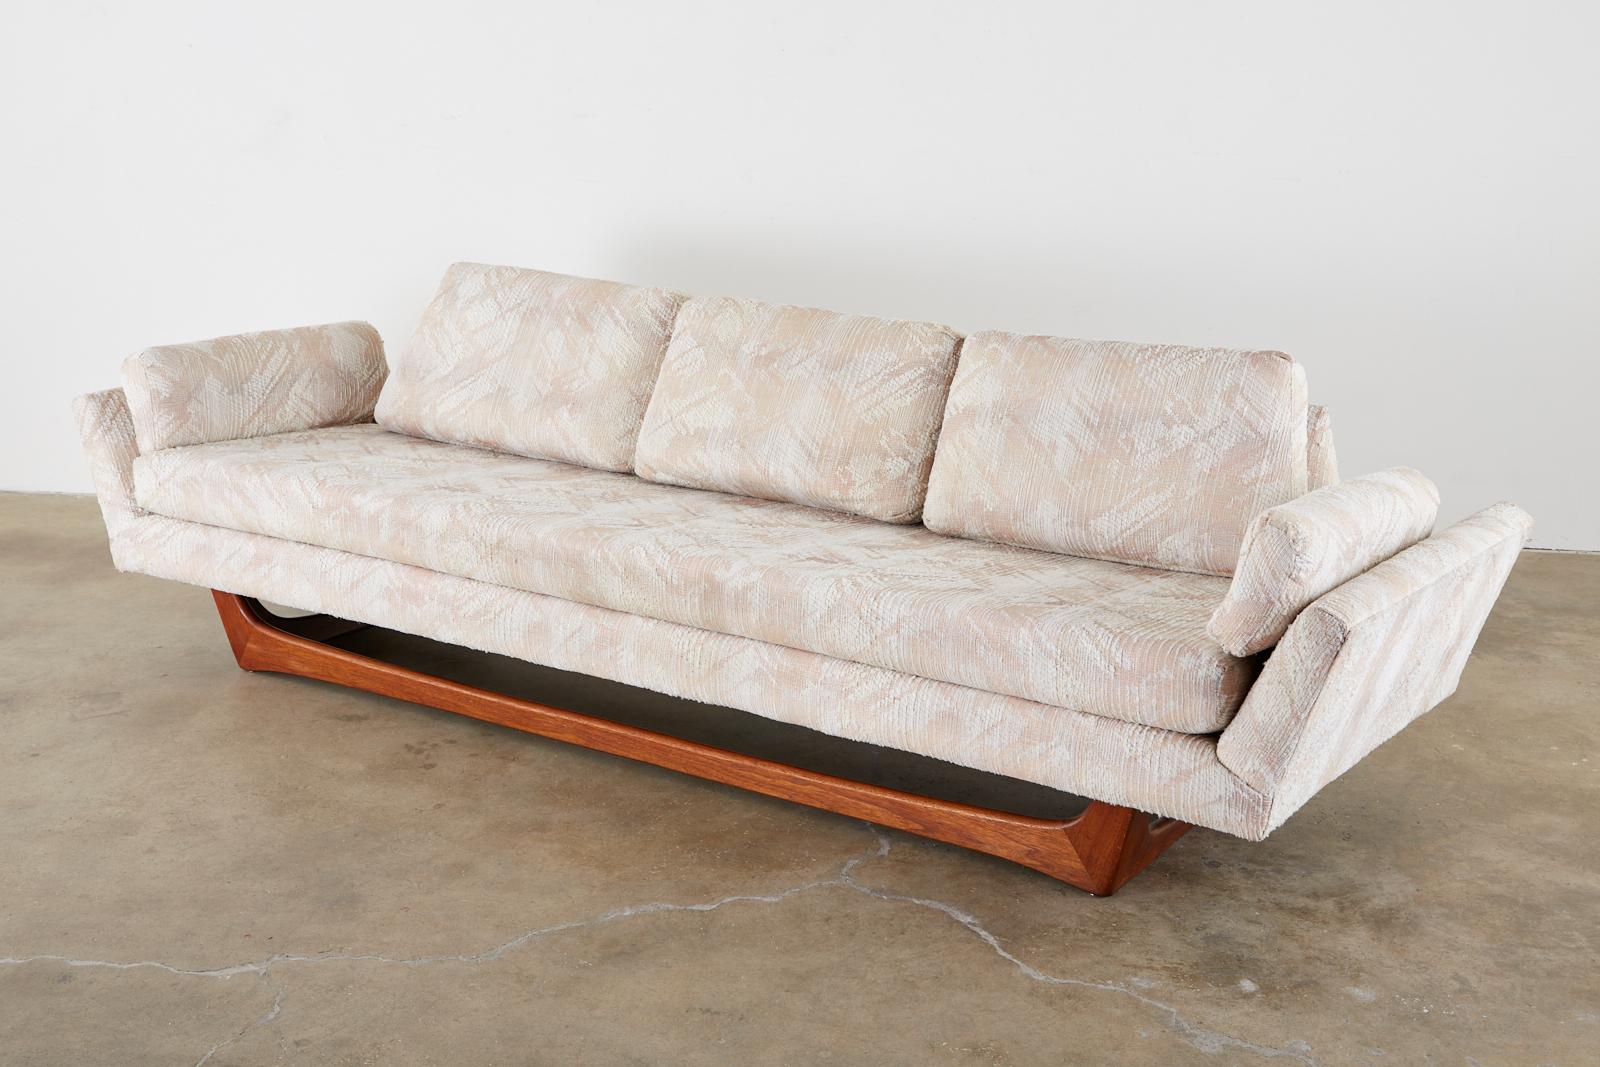 Large Mid-Century Modern gondola sofa attributed to Adrian Pearsall for Craft Associates. Features an angular case with distinctive canted arms at each end, and a low sleek profile. Fitted with loose seat cushions and supported by a richly finished